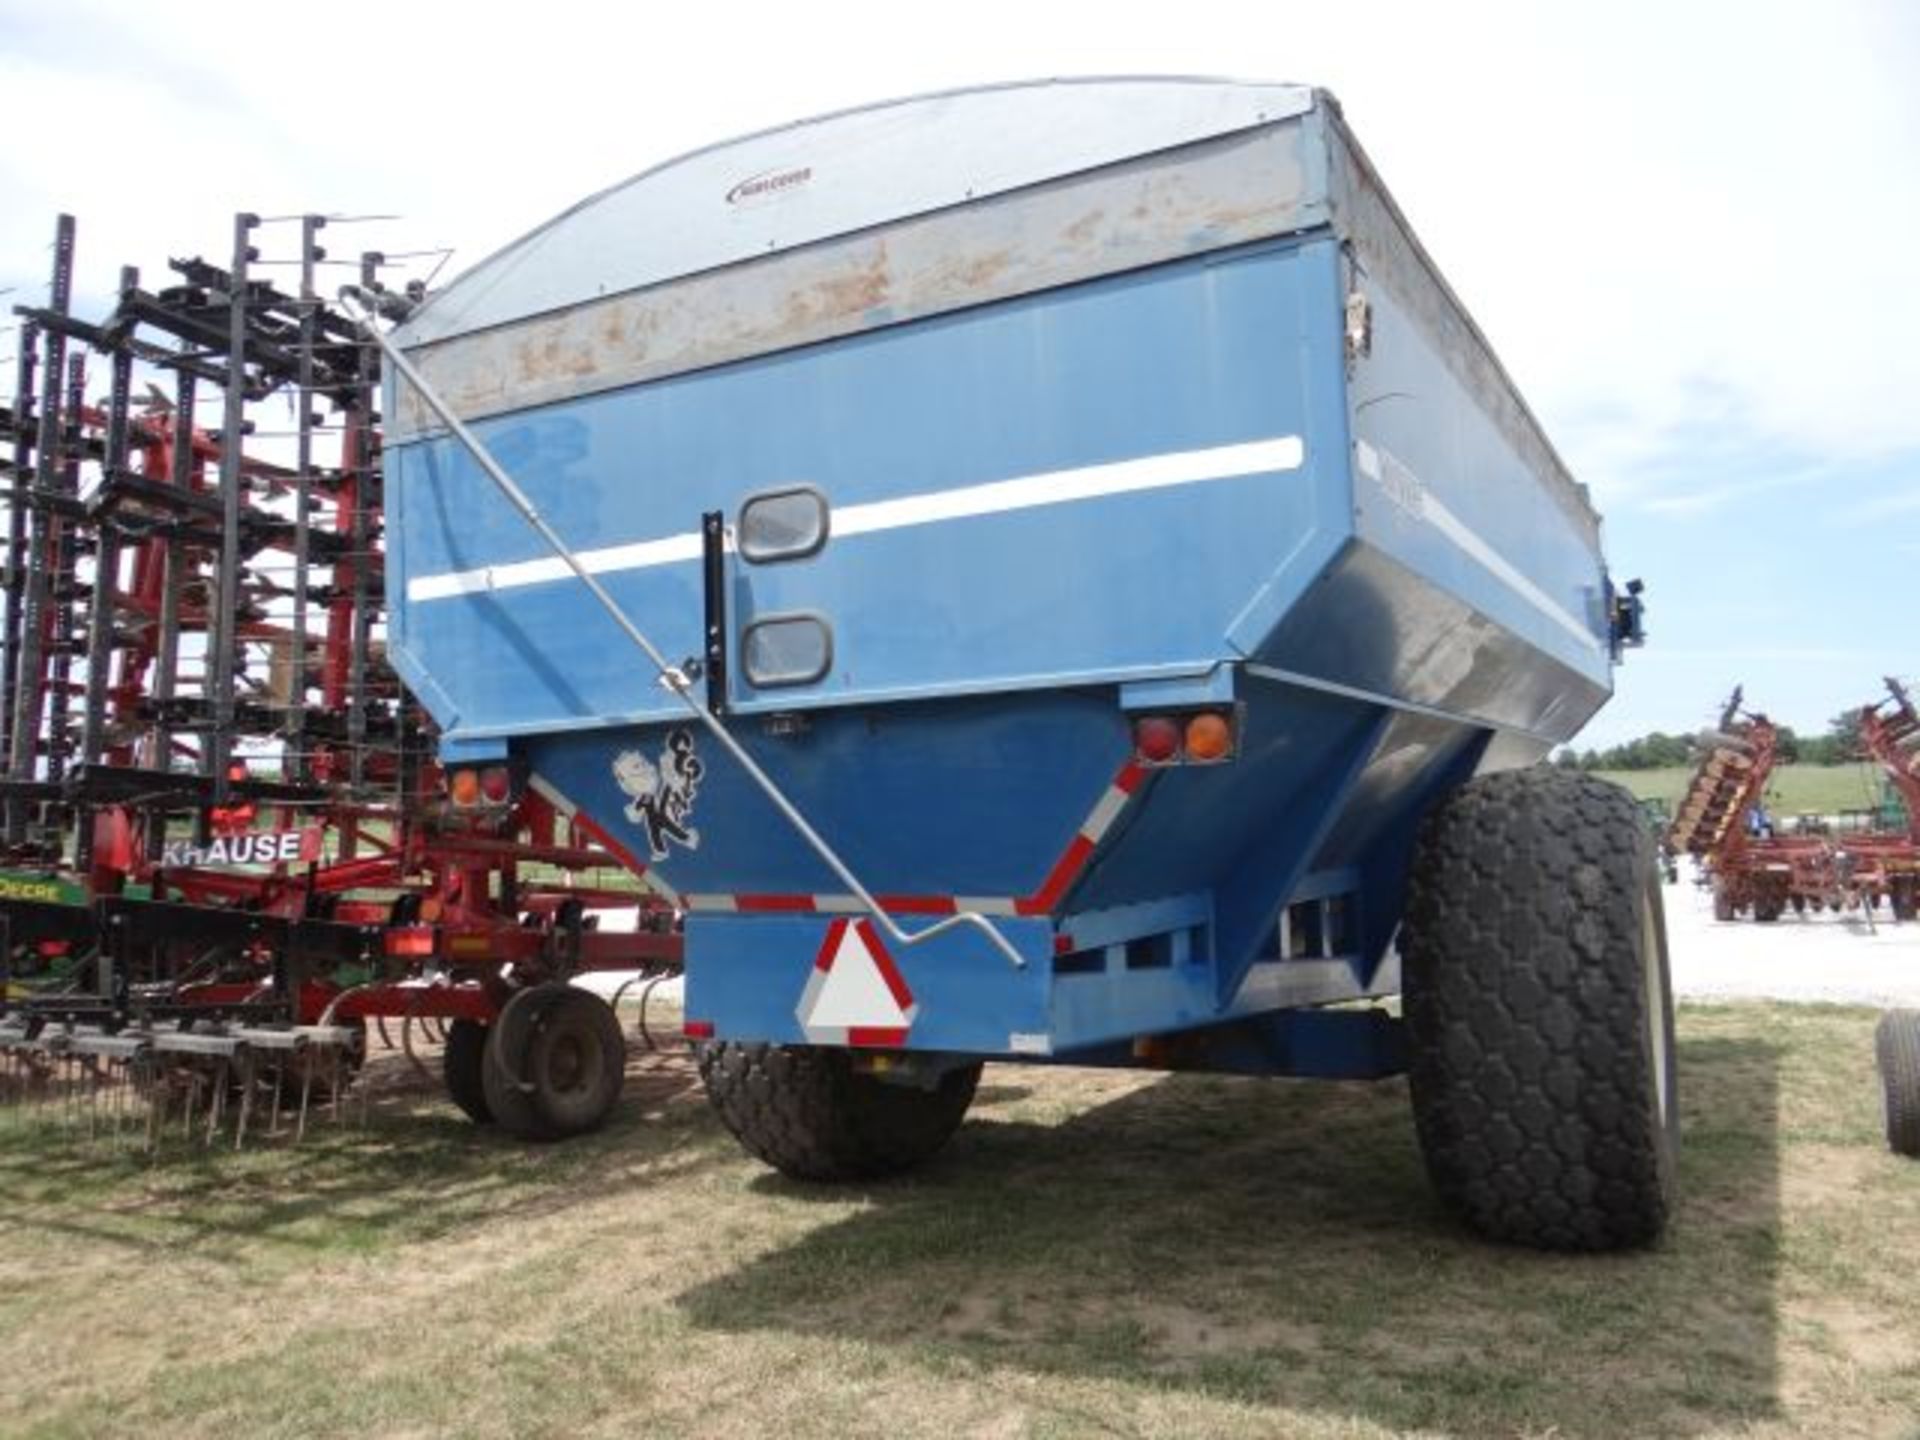 Kinze 840 Grain Cart, 1995 #147837, New Augers Last Year, Tarp, Manual in the Shed - Image 3 of 3